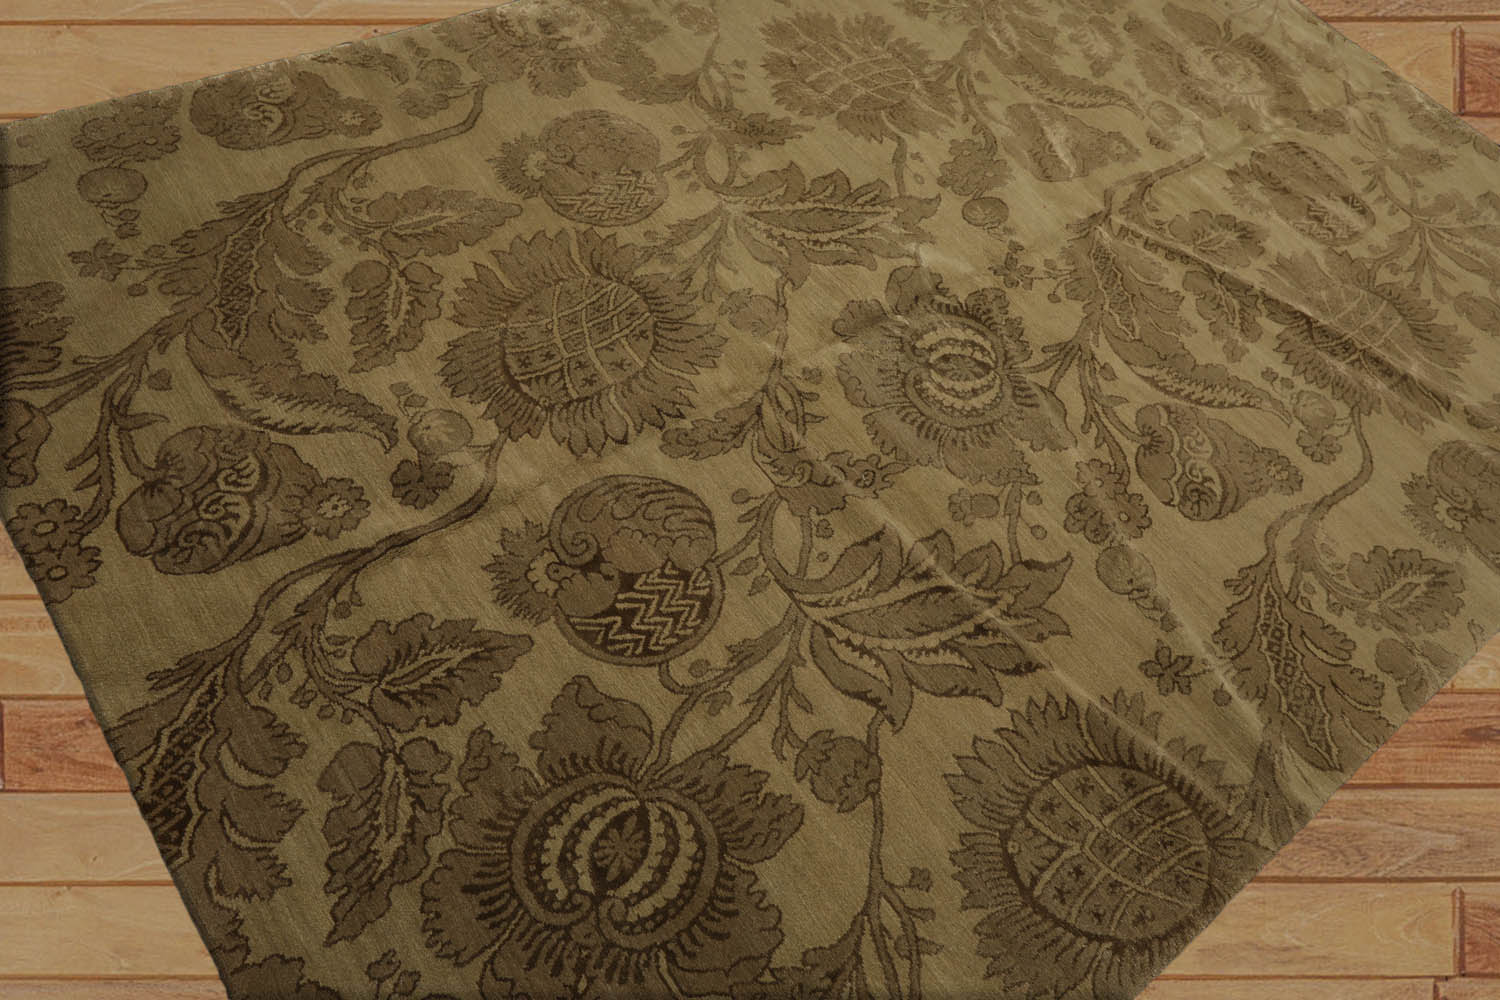 Luboslav 6x9 Hand Knotted Tibetan Wool and Silk Lapchi Transitional Botanical Oriental Area Rug Olive Green, Moss Color